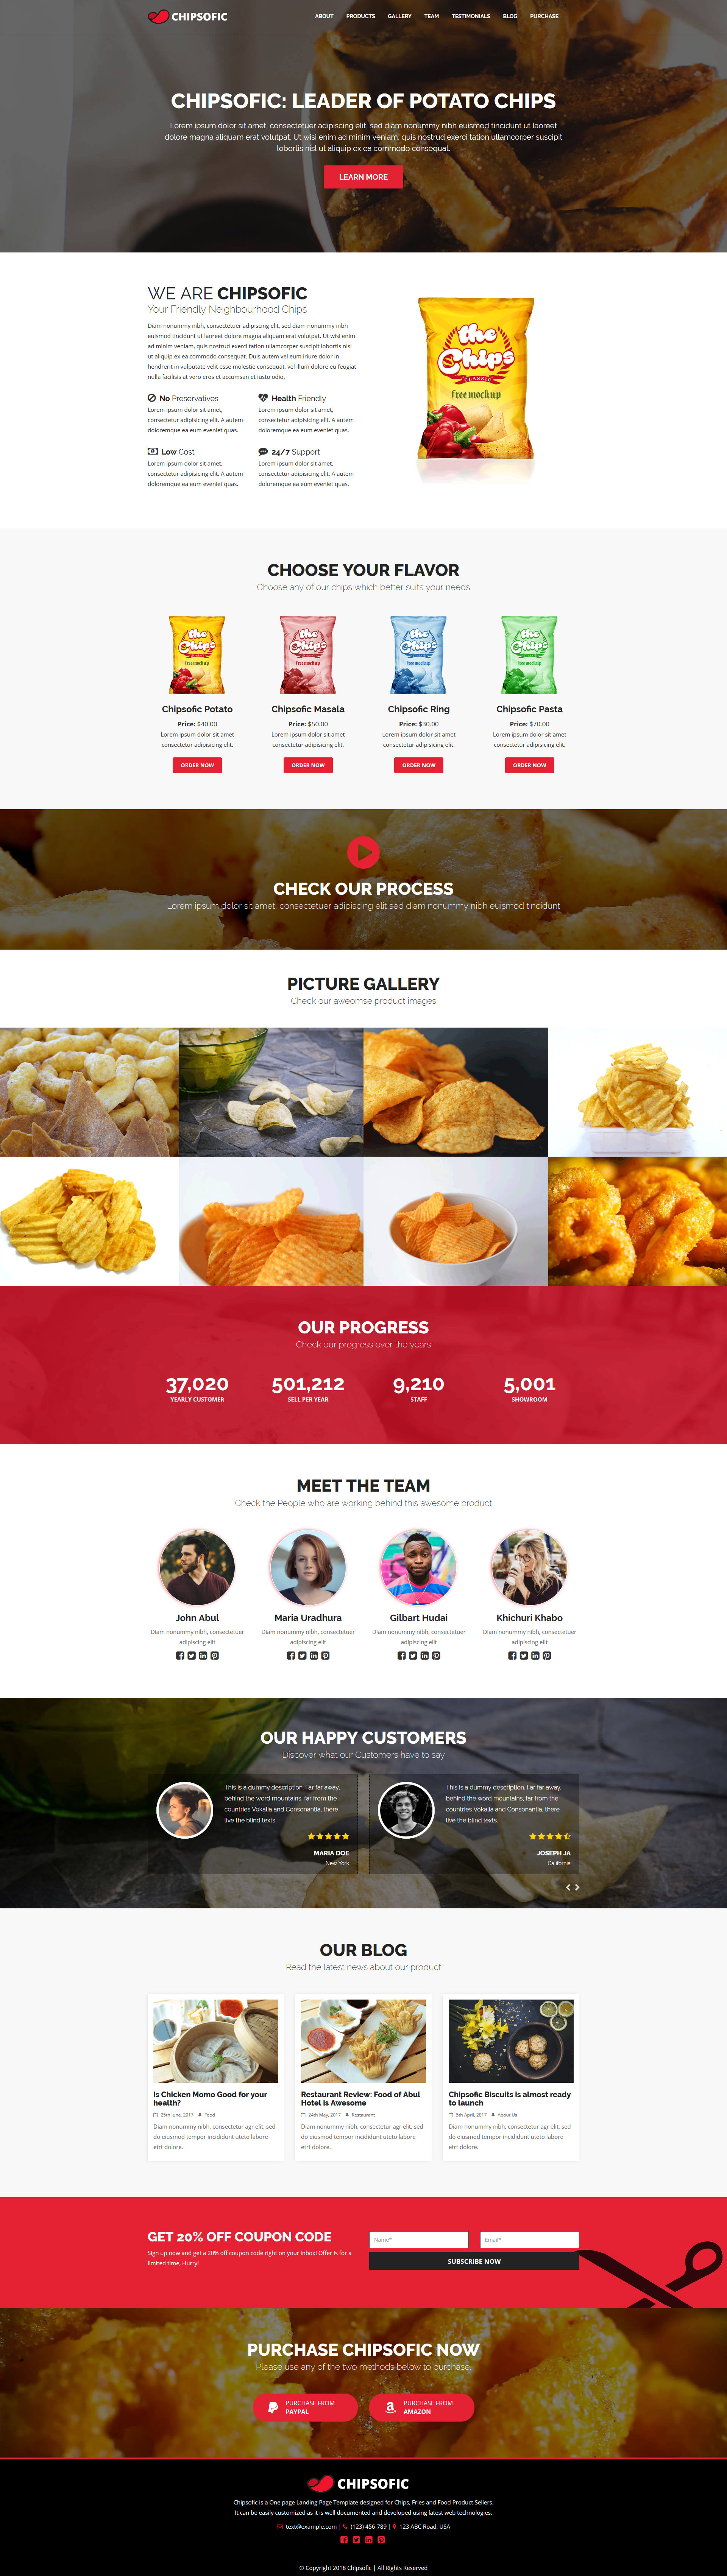 Chipsofic e Page HTML Template for Chips Fries Restaurant and Food Product Seller